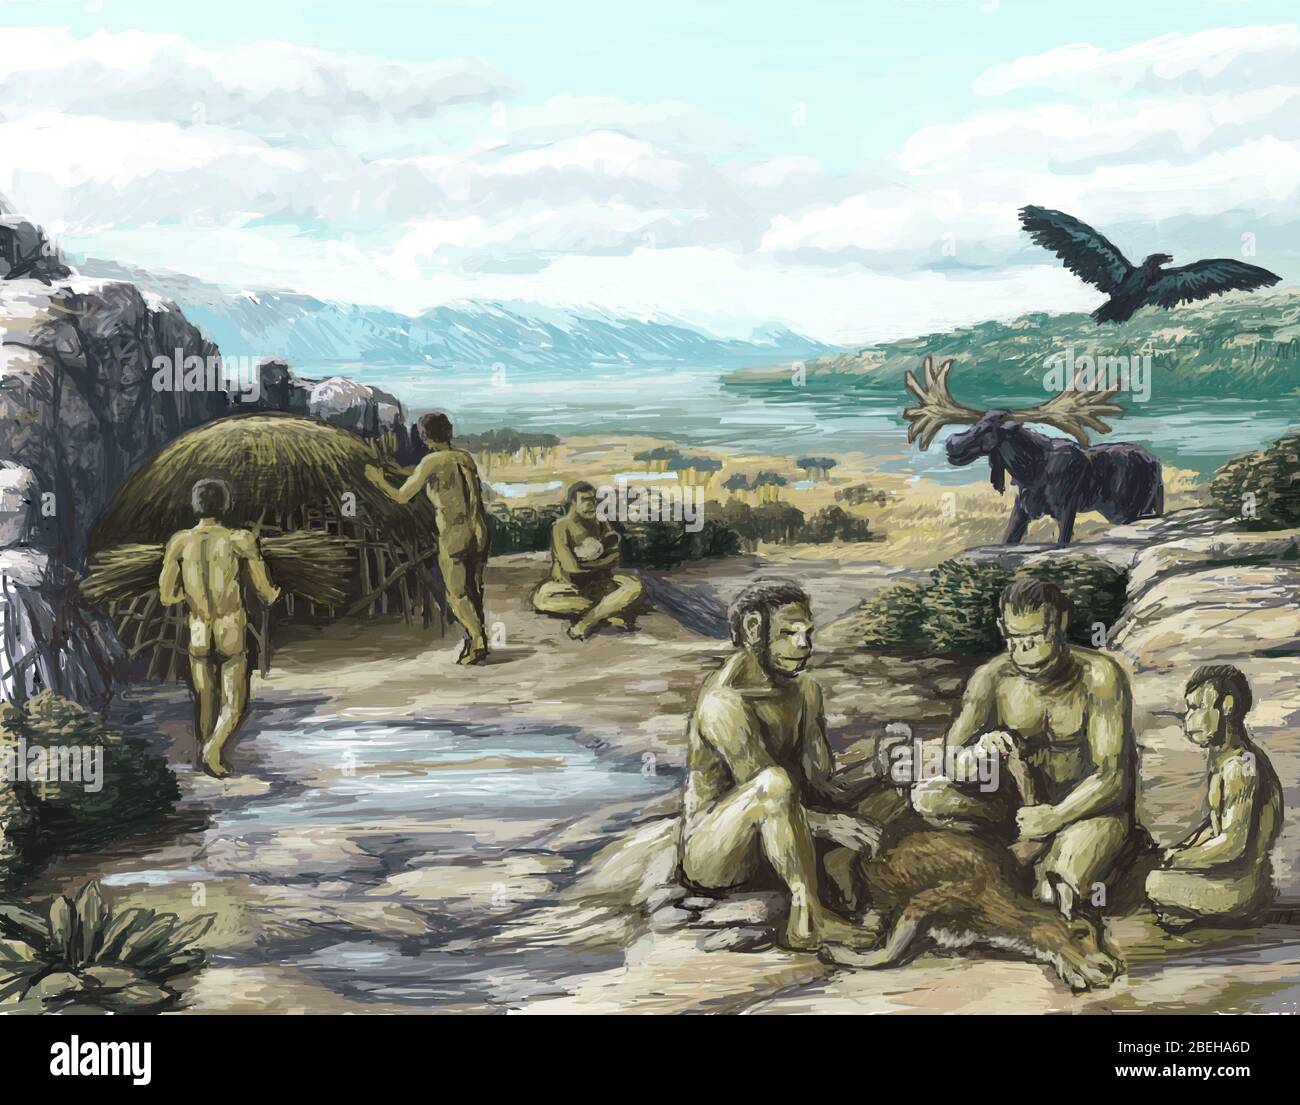 Illustration of an early hominid settlement in the Quaternary Period. Homo erectus appears in the start of this period and it is often referred to as the 'Age of Humans'. Stock Photo